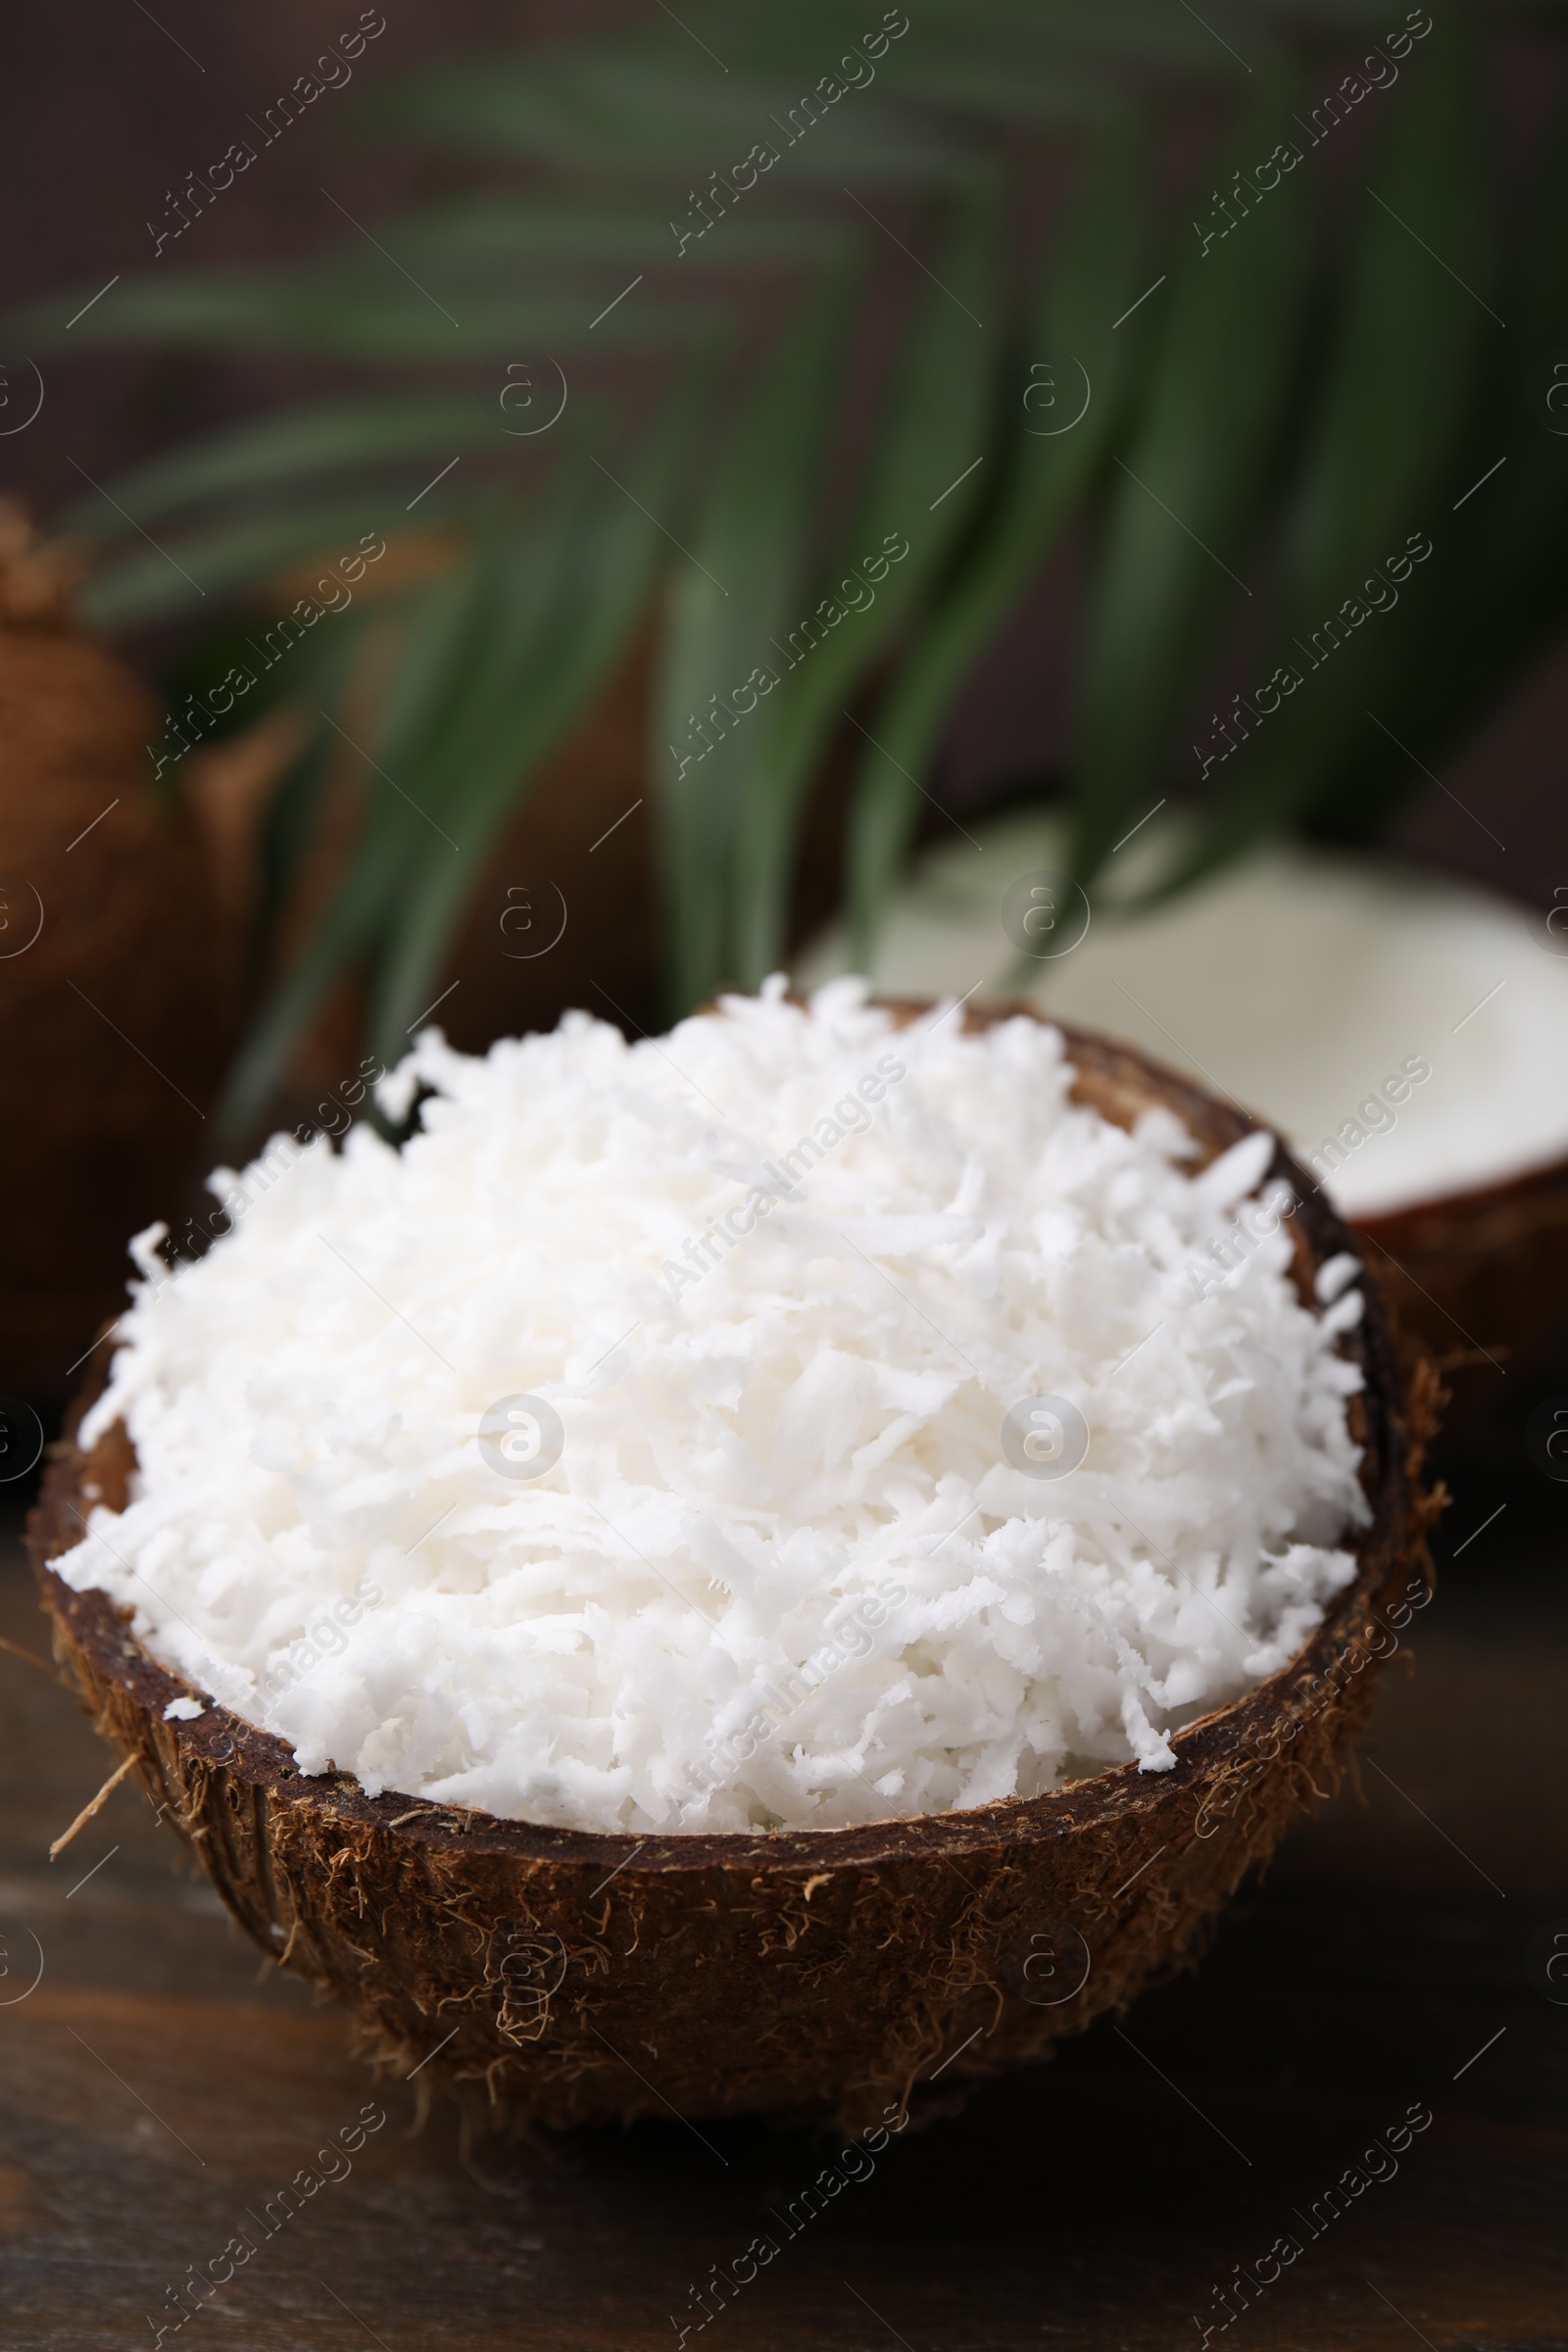 Photo of Coconut flakes in nut shell on wooden table